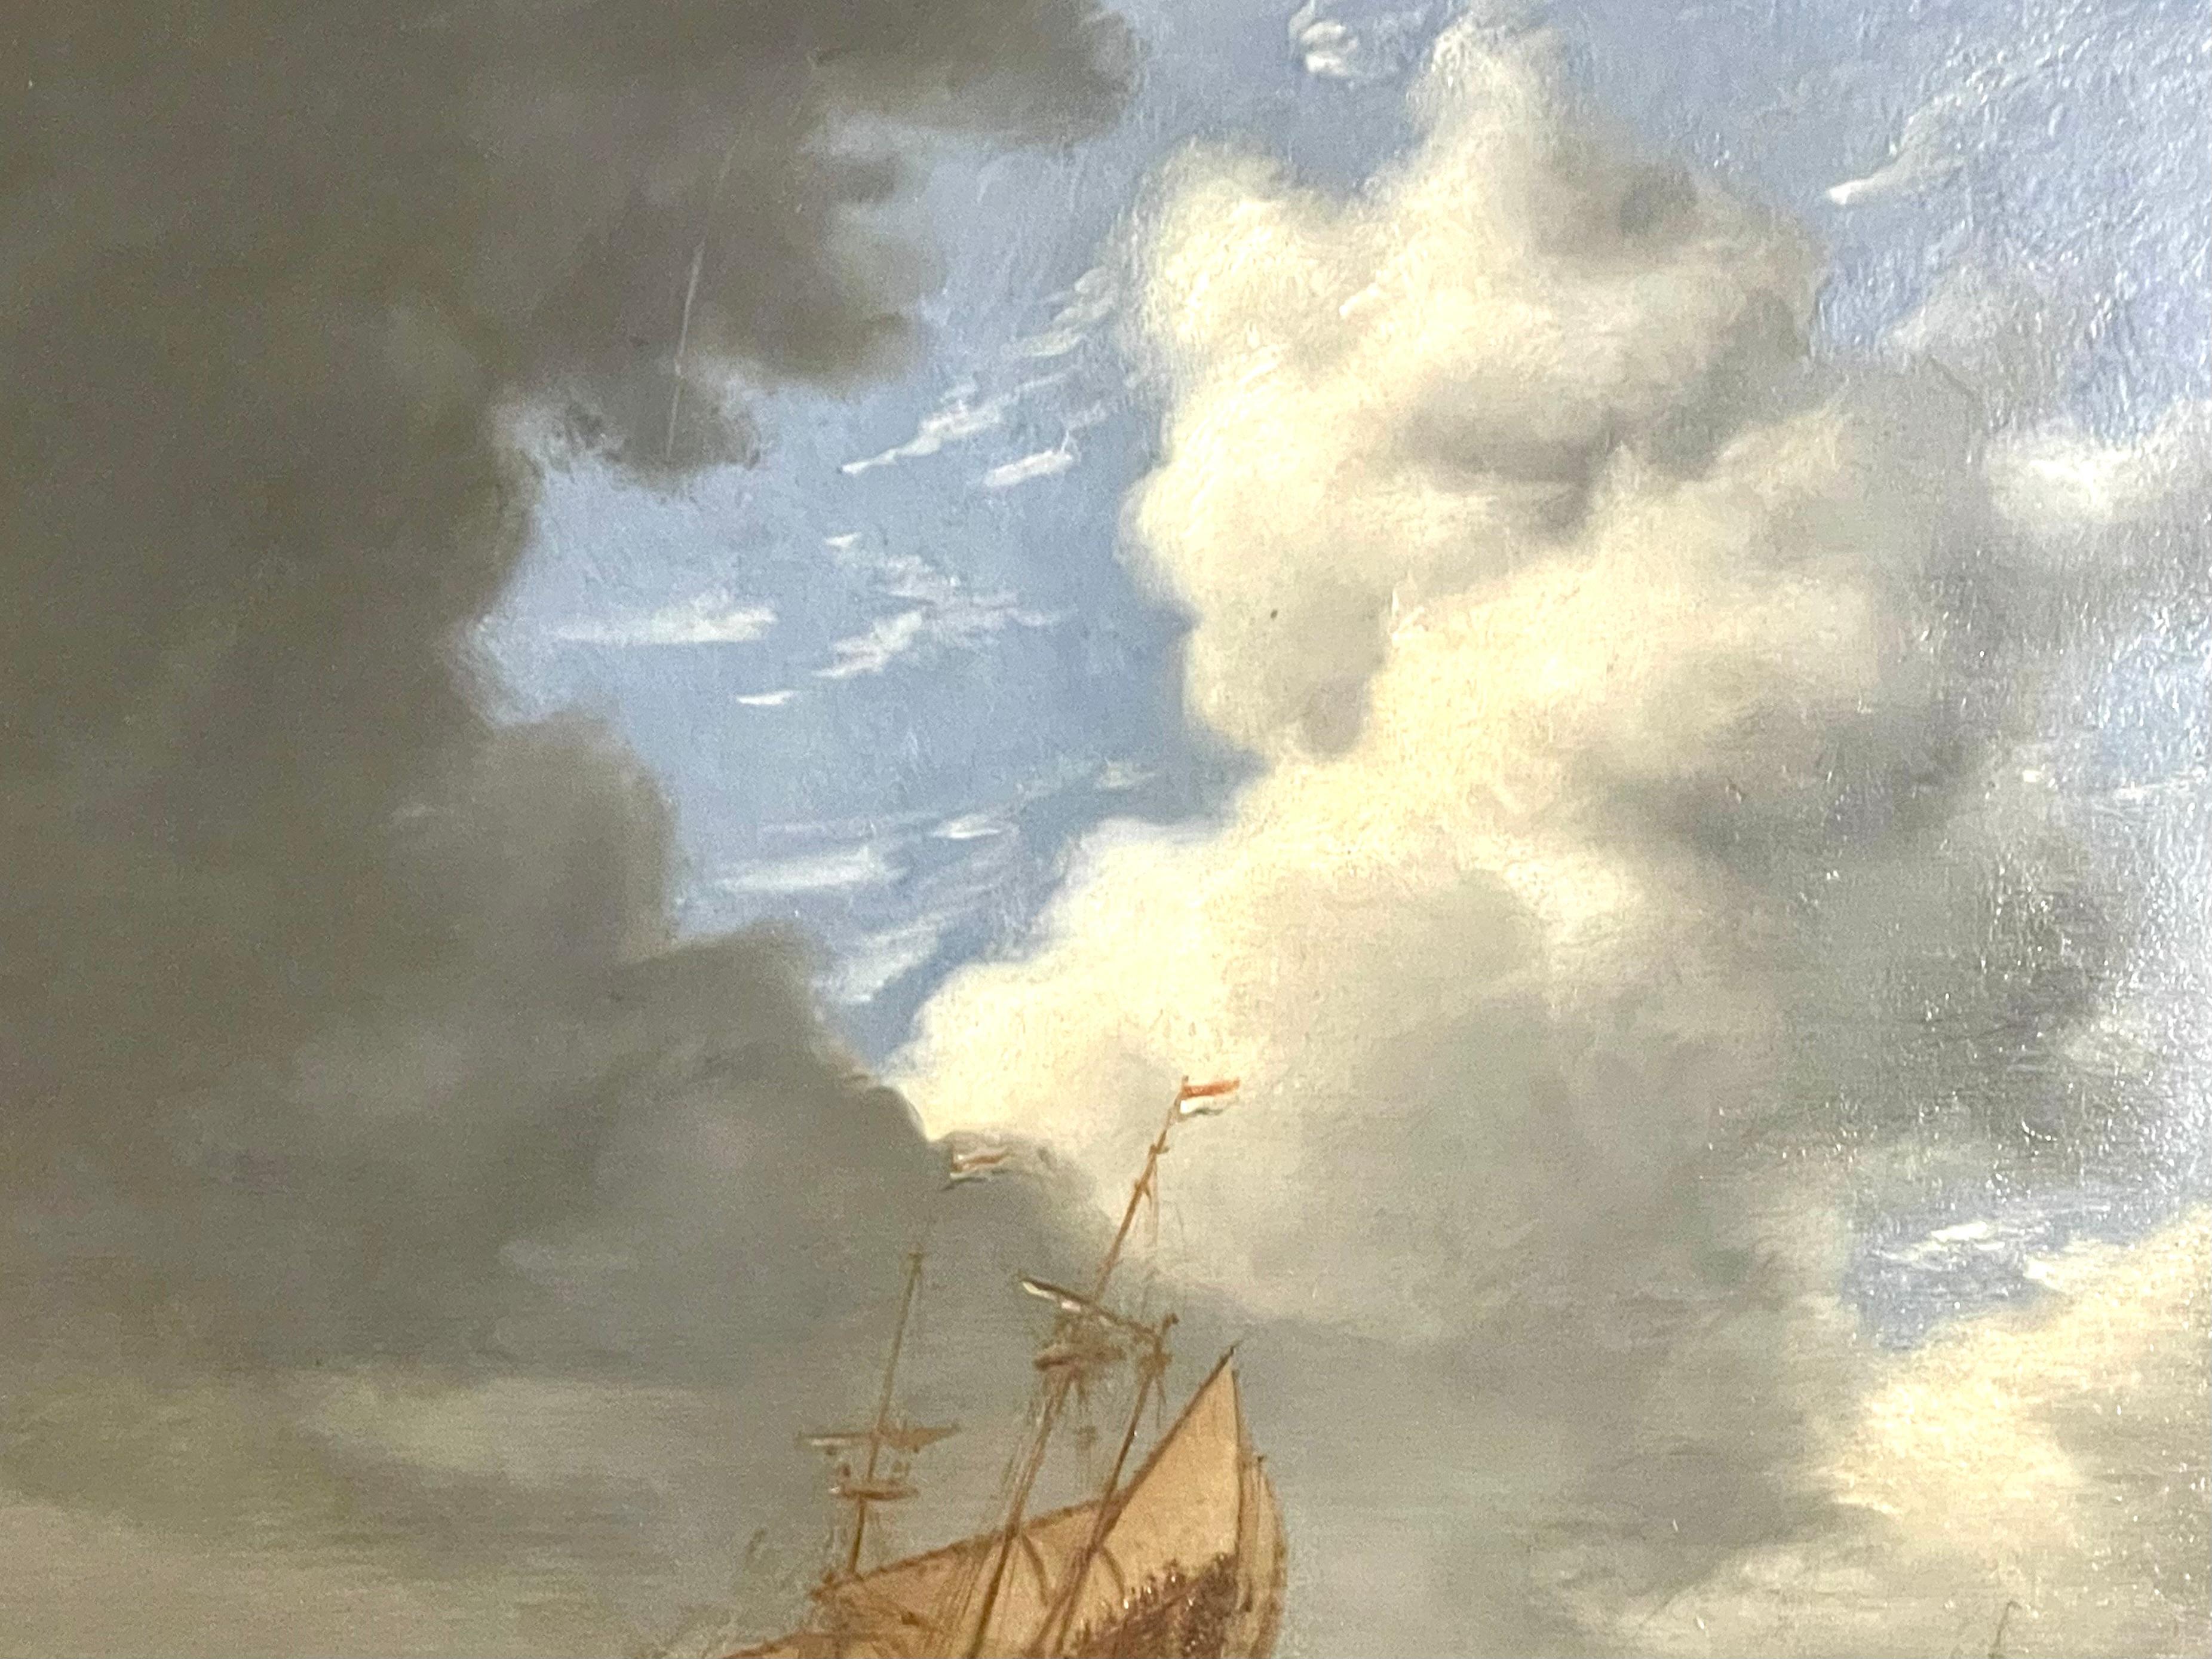 Dutch School, 17th century oil painting on board, this work features a golden ship on blue seas with white crests against a stormy clouded sky.  In the distance more ships can be seen, and a spot of blue sky gives the stormy clouds relief.  Light